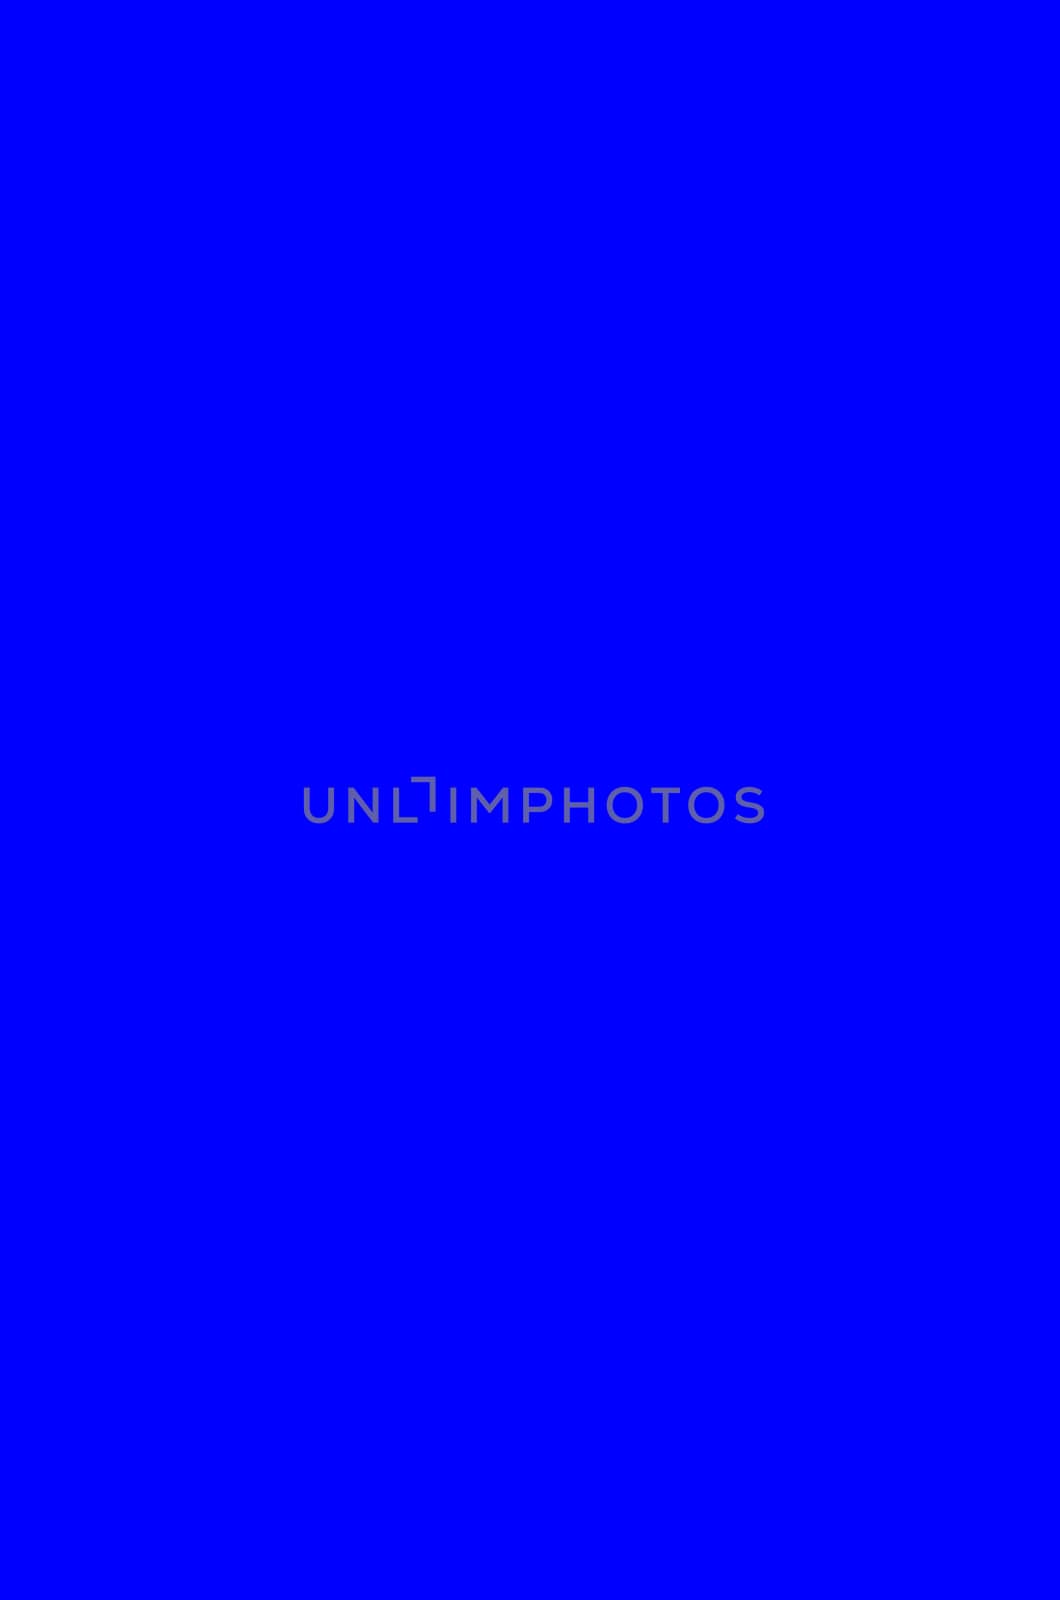 Abstract background blur blue by aoo3771